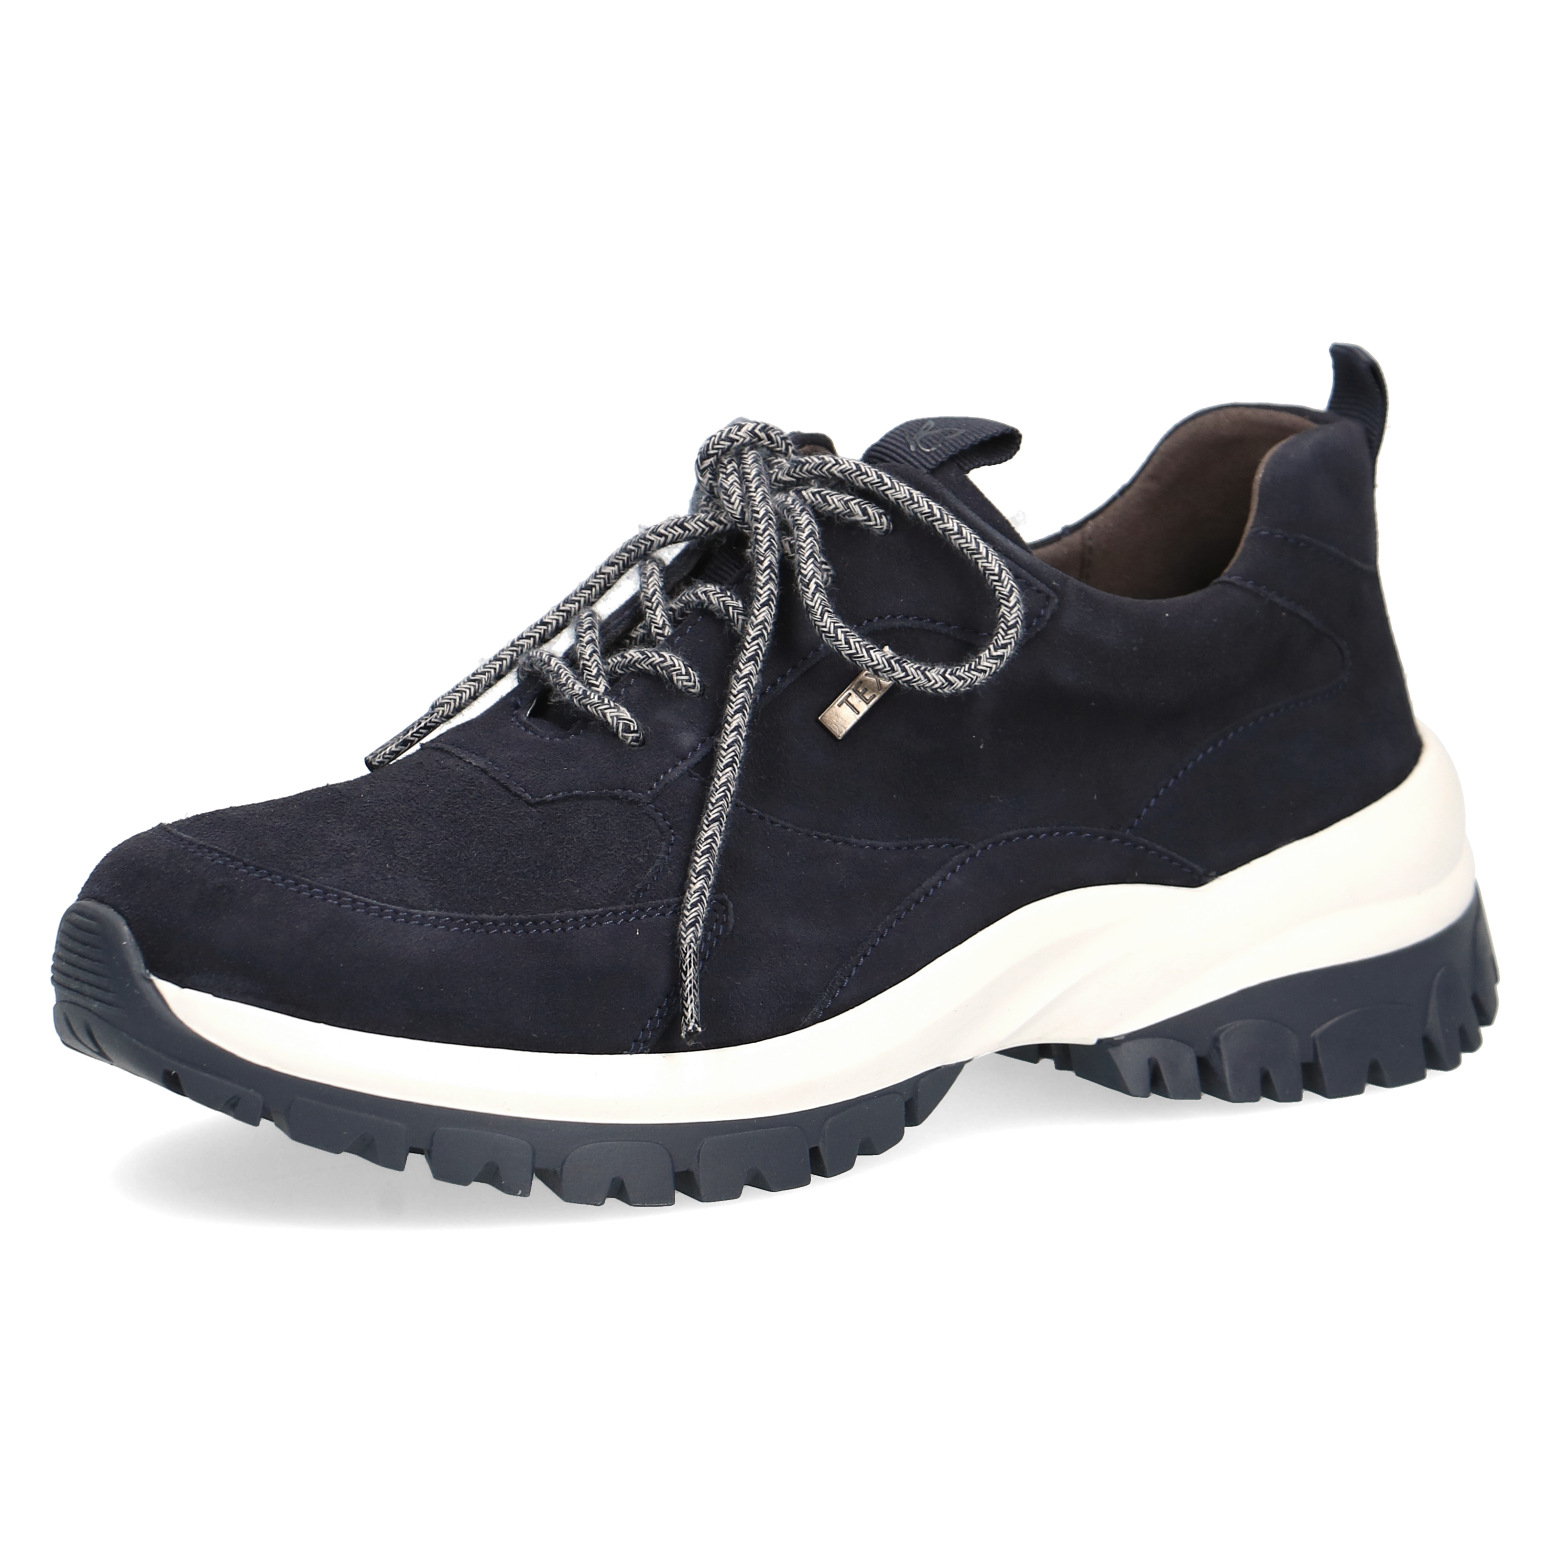 Caprice Sneaker - Blue Leather